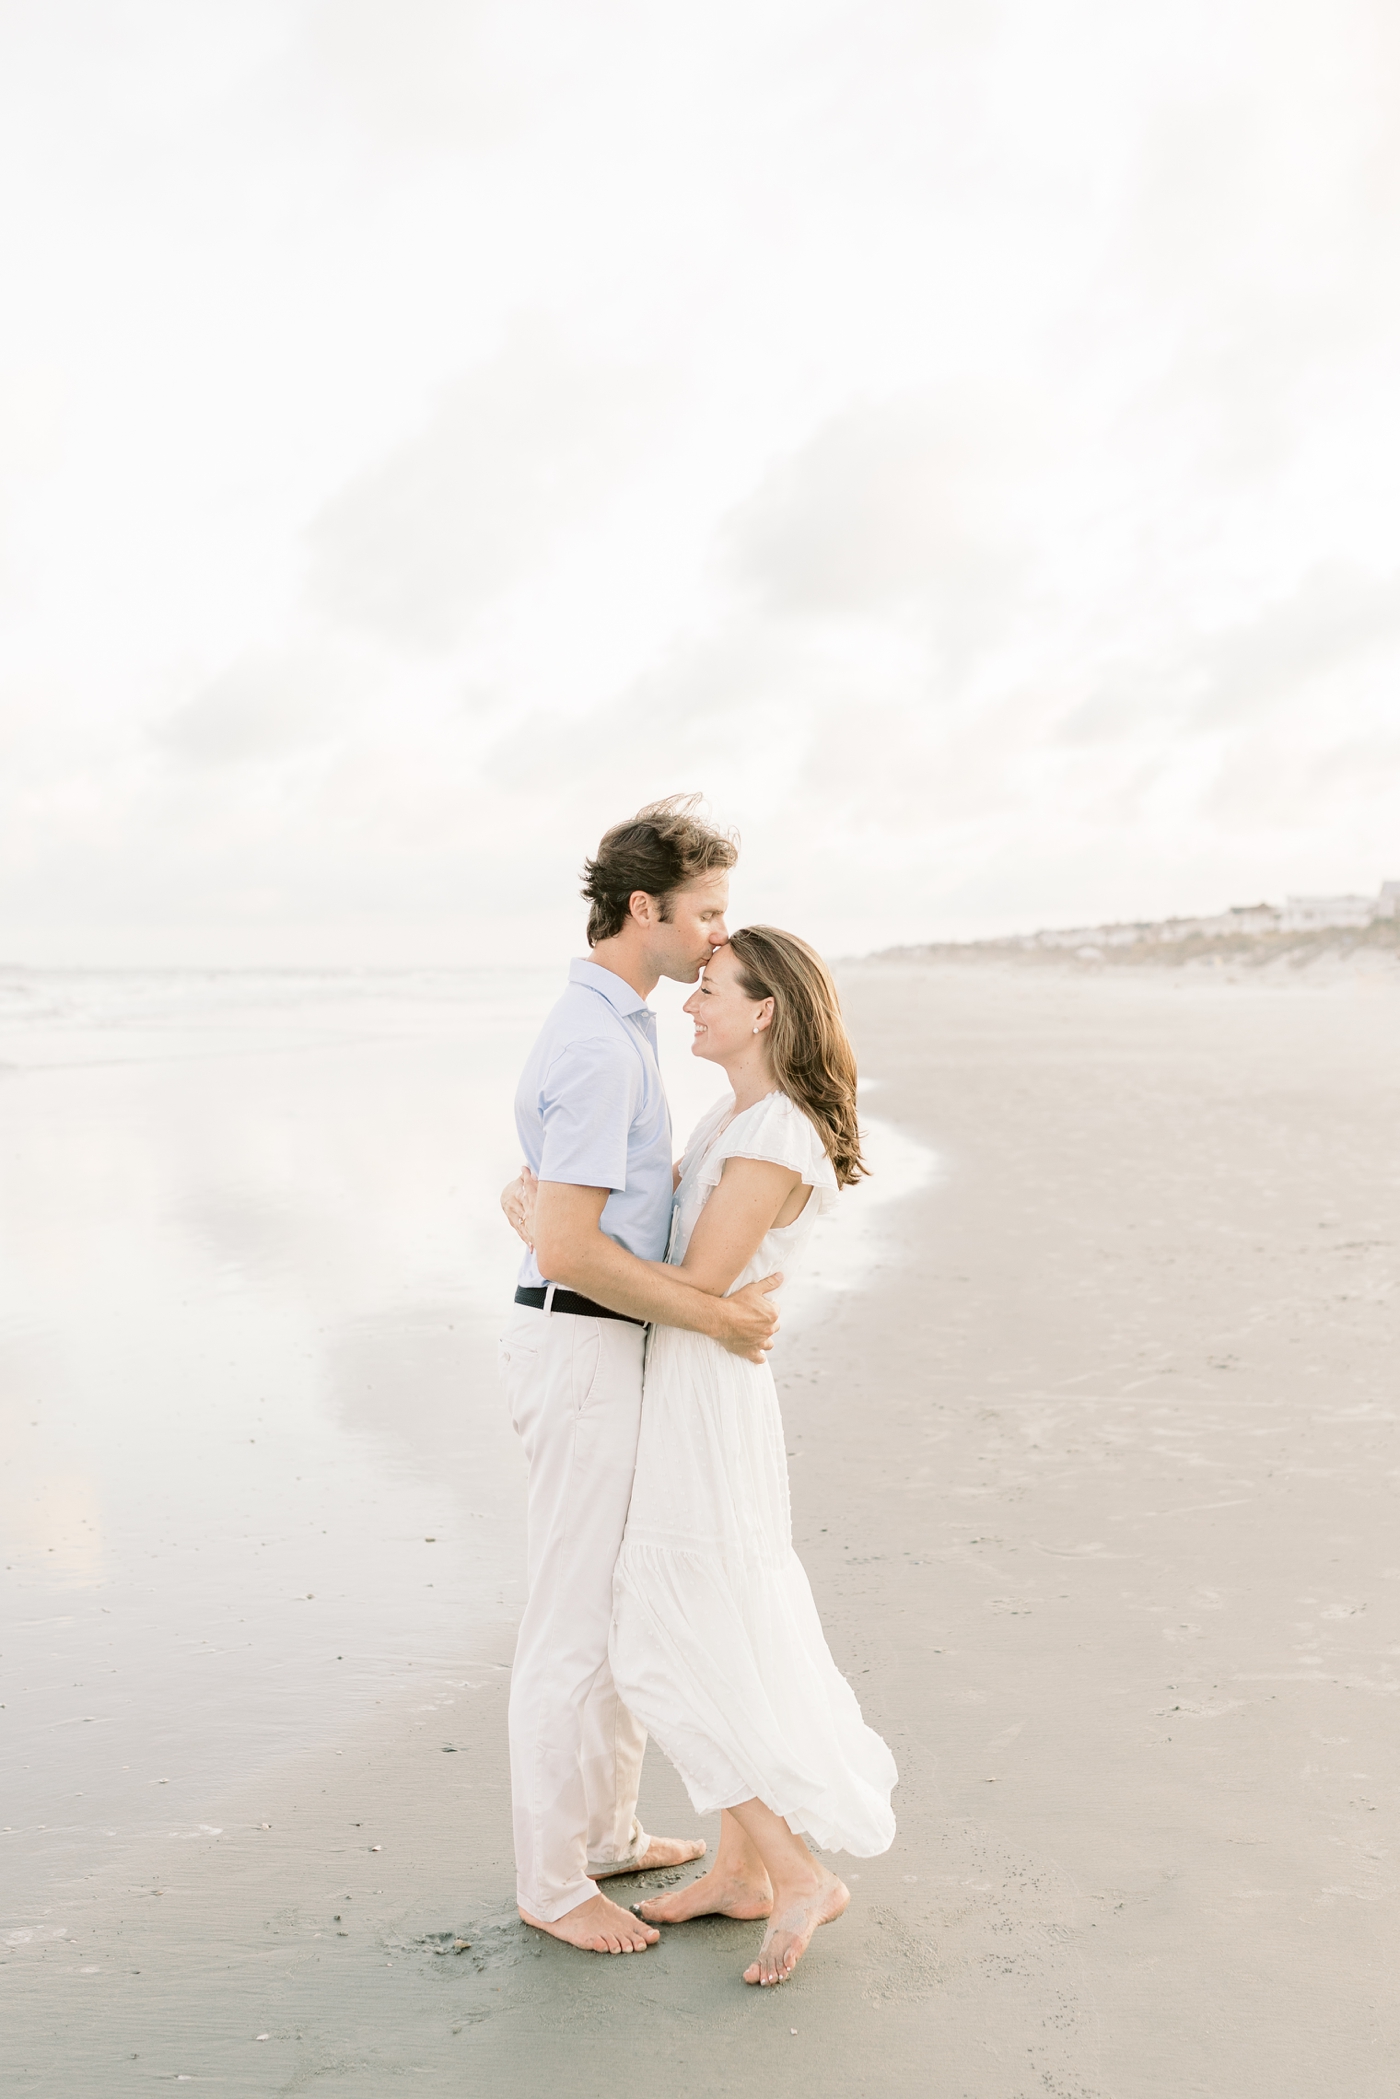 Couple embracing on the beach | Photo by Caitlyn Motycka Photography.